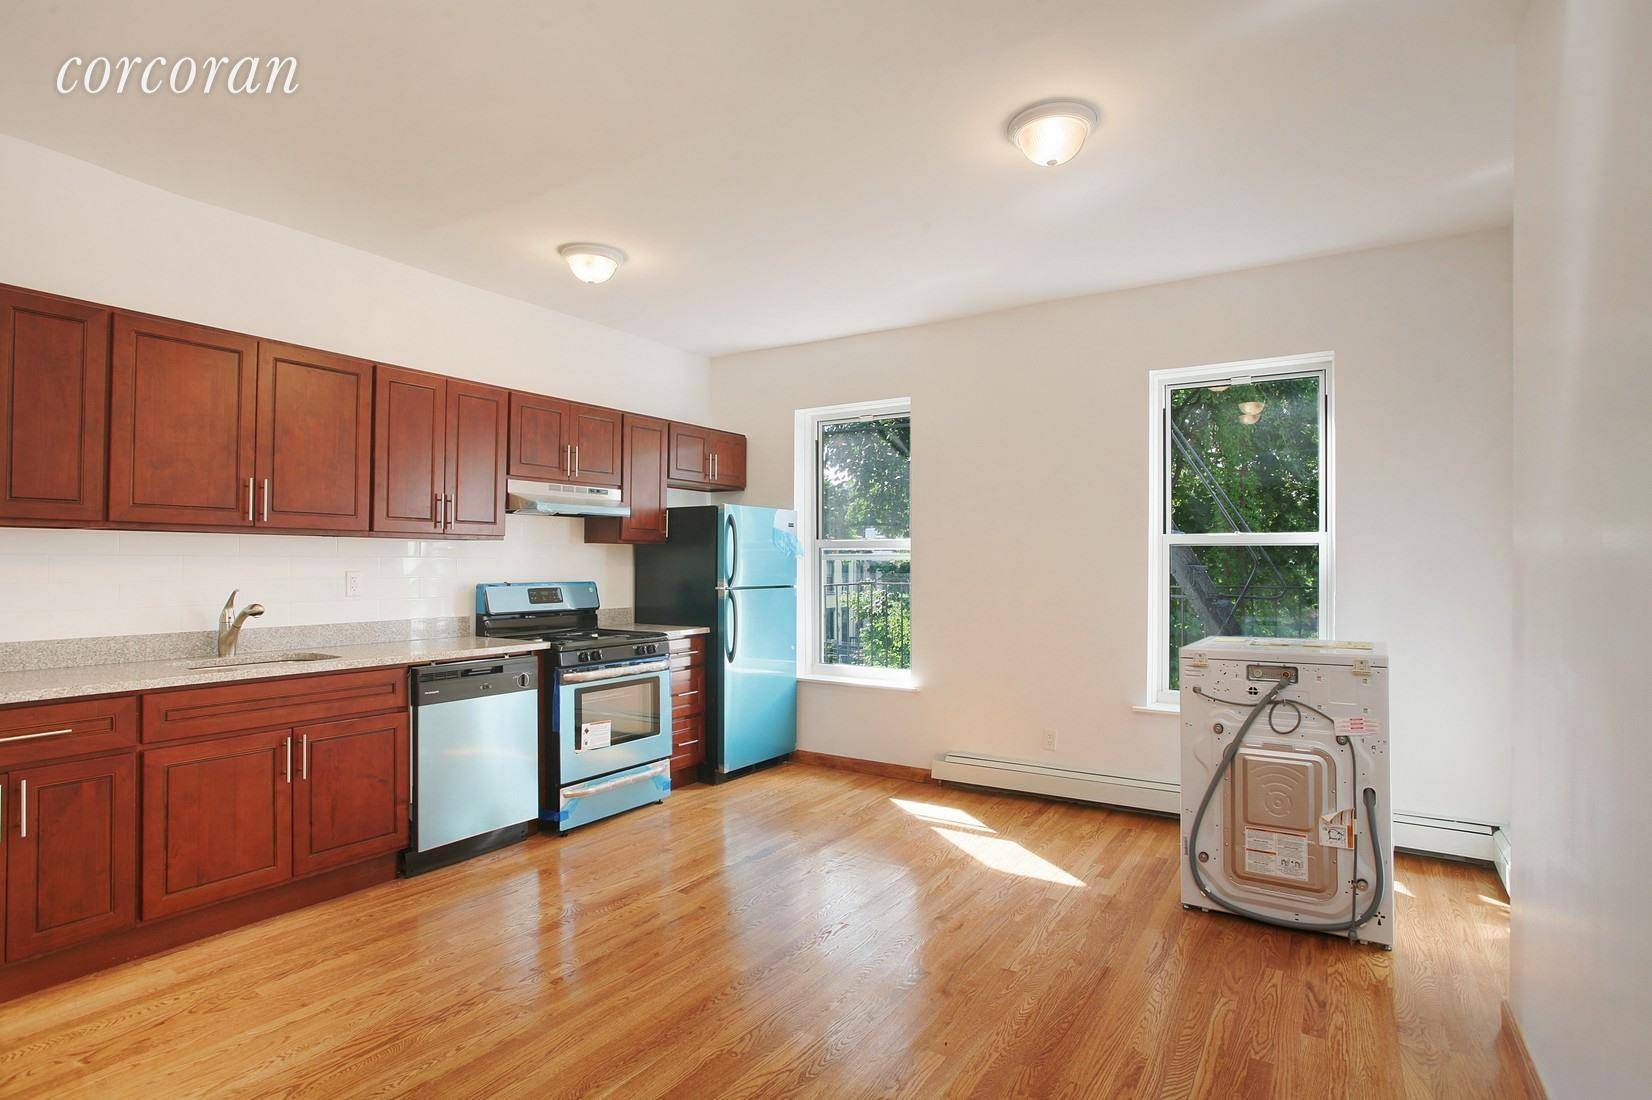 Welcome to this renovated 2 bed, 1 bath apartment in a beautiful Park Slope townhouse.